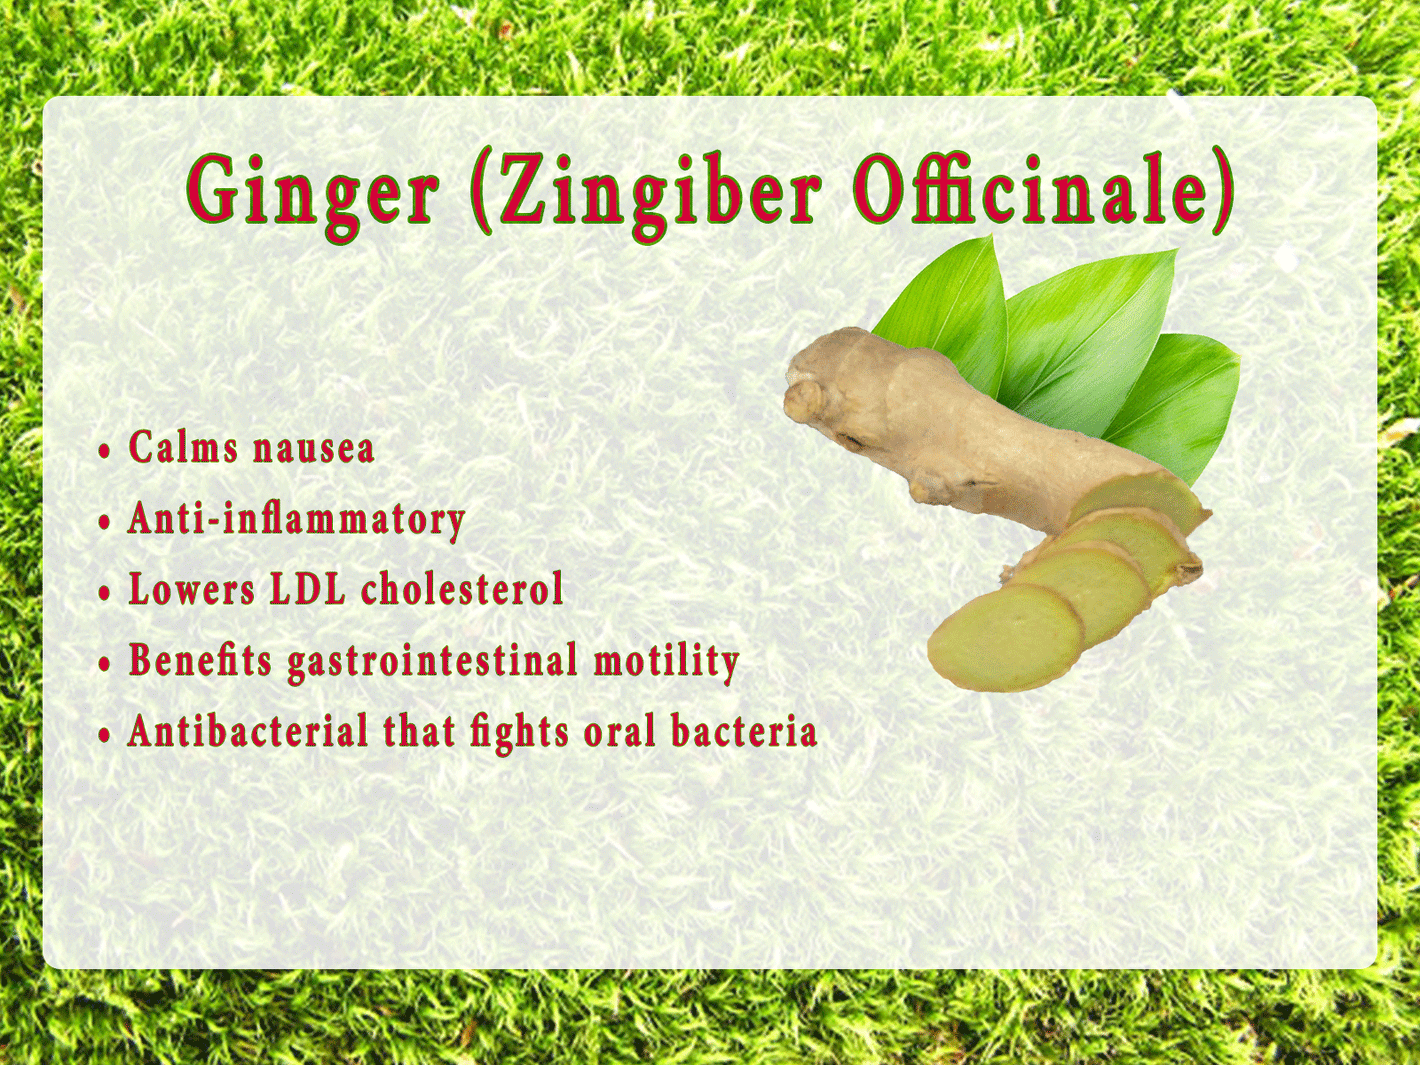 Ginger (Zingiber Officinale) •	Calms nausea •	Anti-inflammatory •	Lowers LDL cholesterol •	Benefits gastrointestinal motility •	Antibacterial that fights oral bacteria 